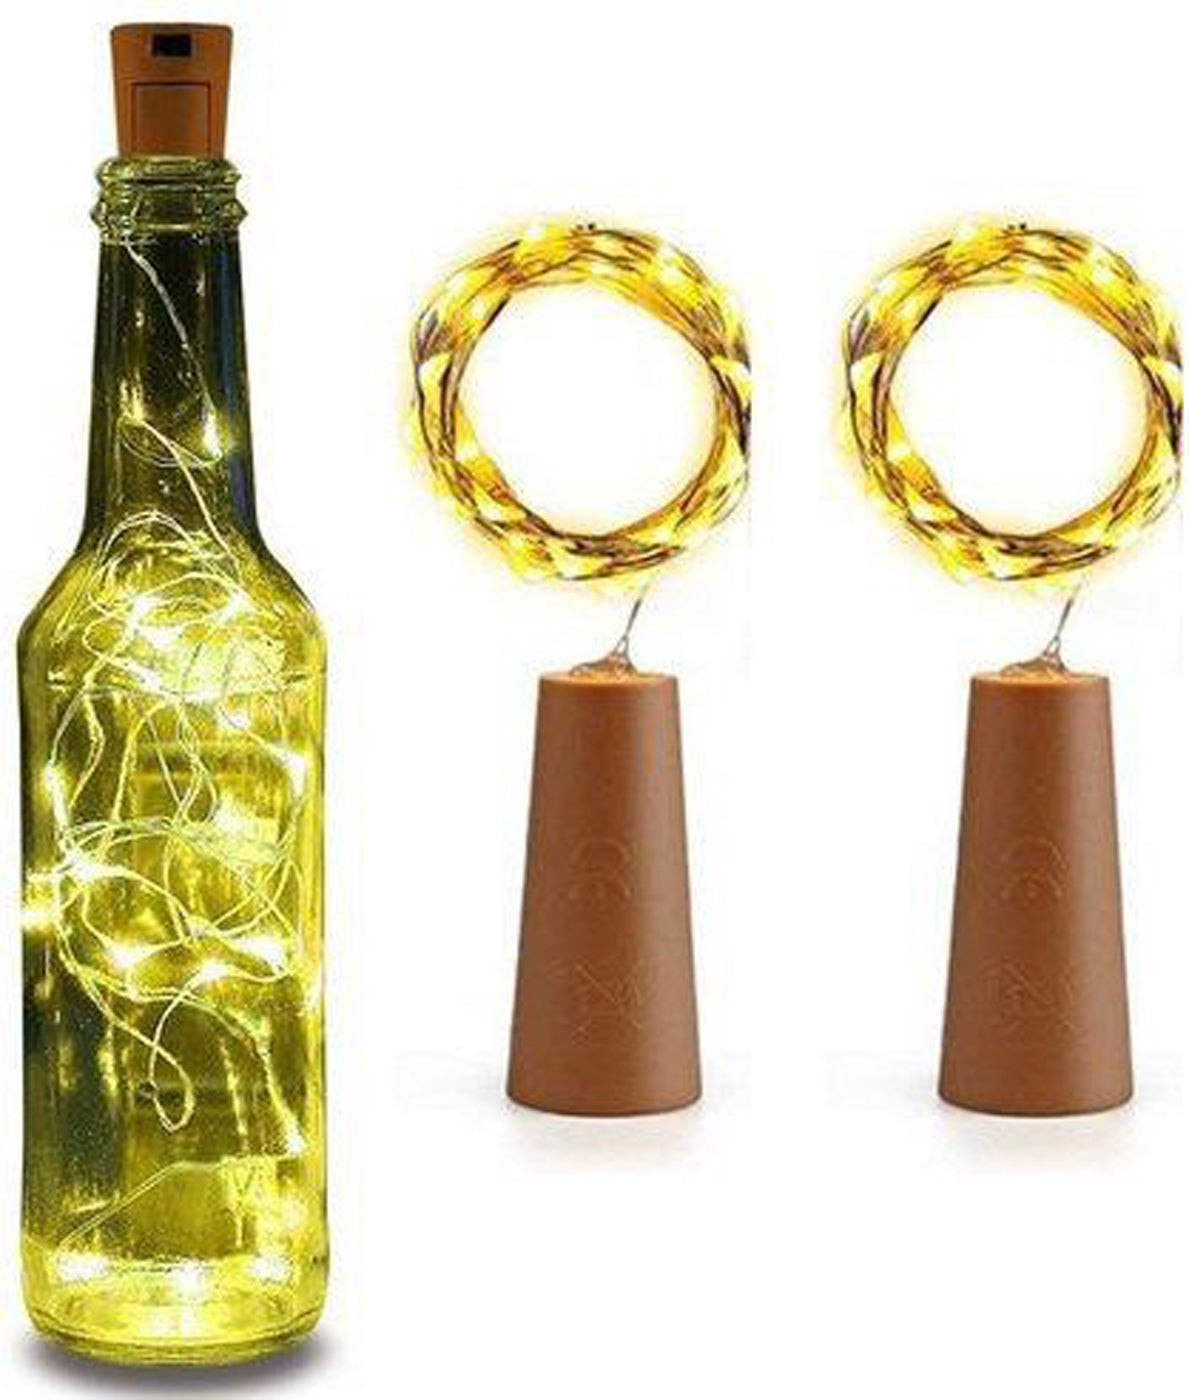 DecorTwist LED Copper String Cork Light for Home and Office Decor| Indoor & Outdoor Decorative Lights|Diwali |Wedding | Diwali | Wedding (Copper String Cork, 2)